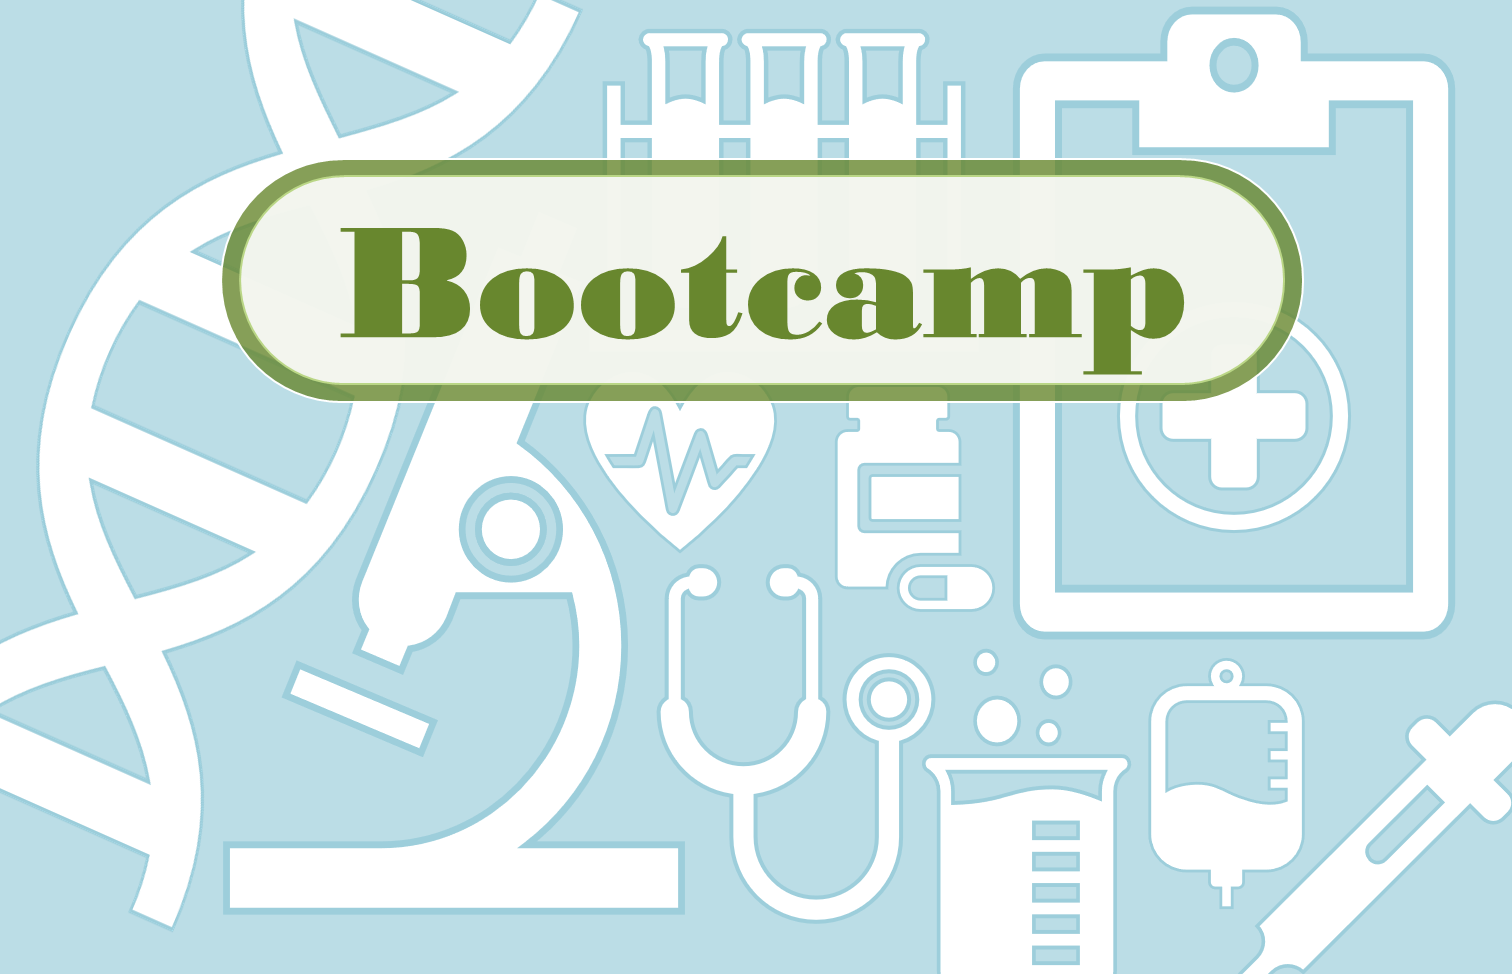 Icons for a variety of clinical trials tools, including a stethoscope, microscope and pill body, used for clinical trials with a banner advertising an upcoming bootcamp.